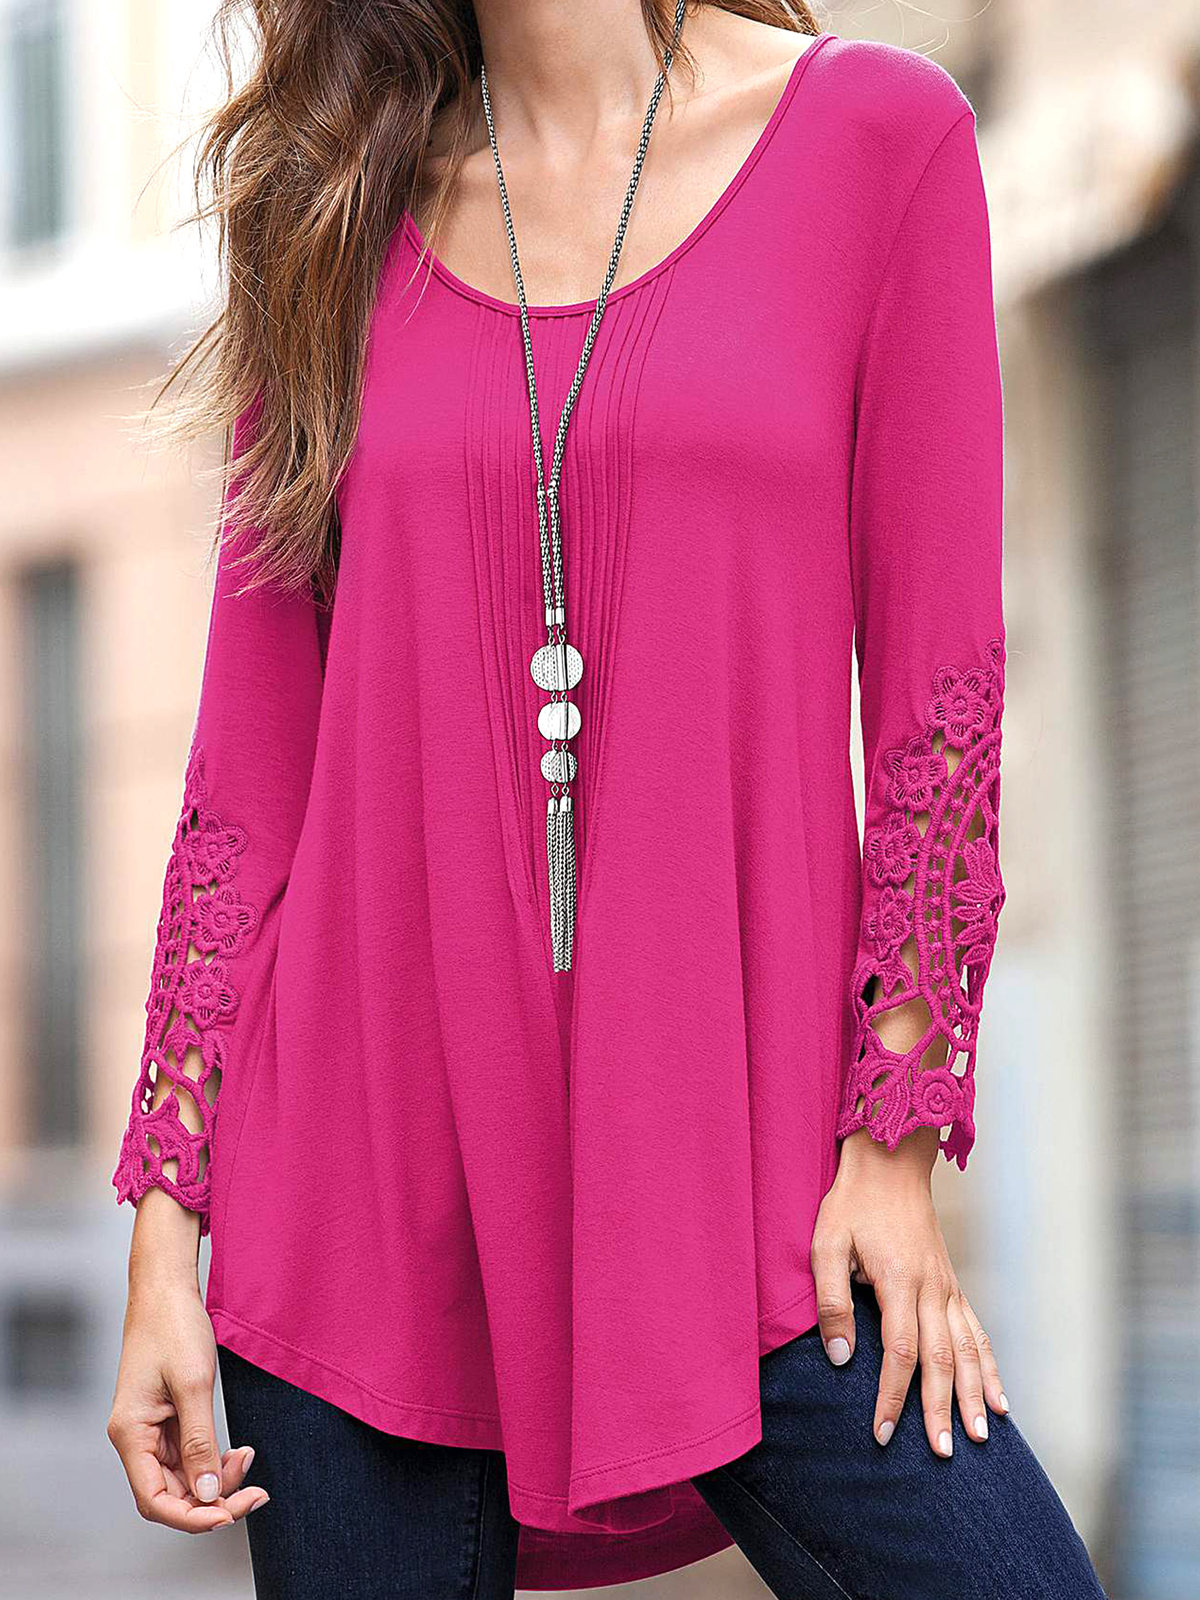 Together PINK Lace Sleeve Jersey Top - Plus Size 12 to 32